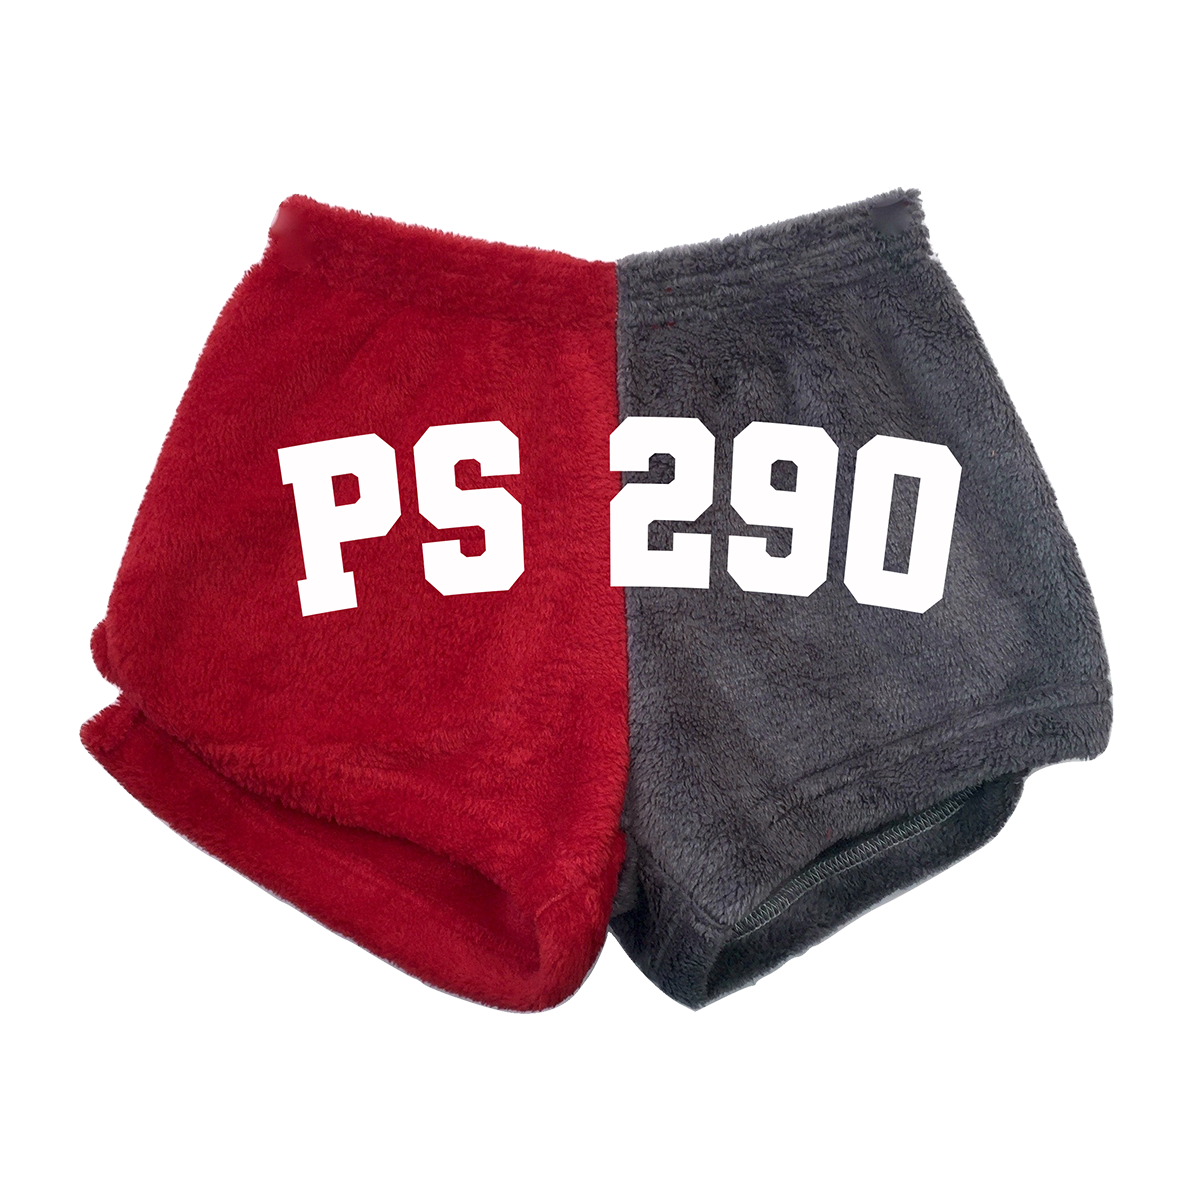 PS 290 Fuzzy Red/Gray Shorts